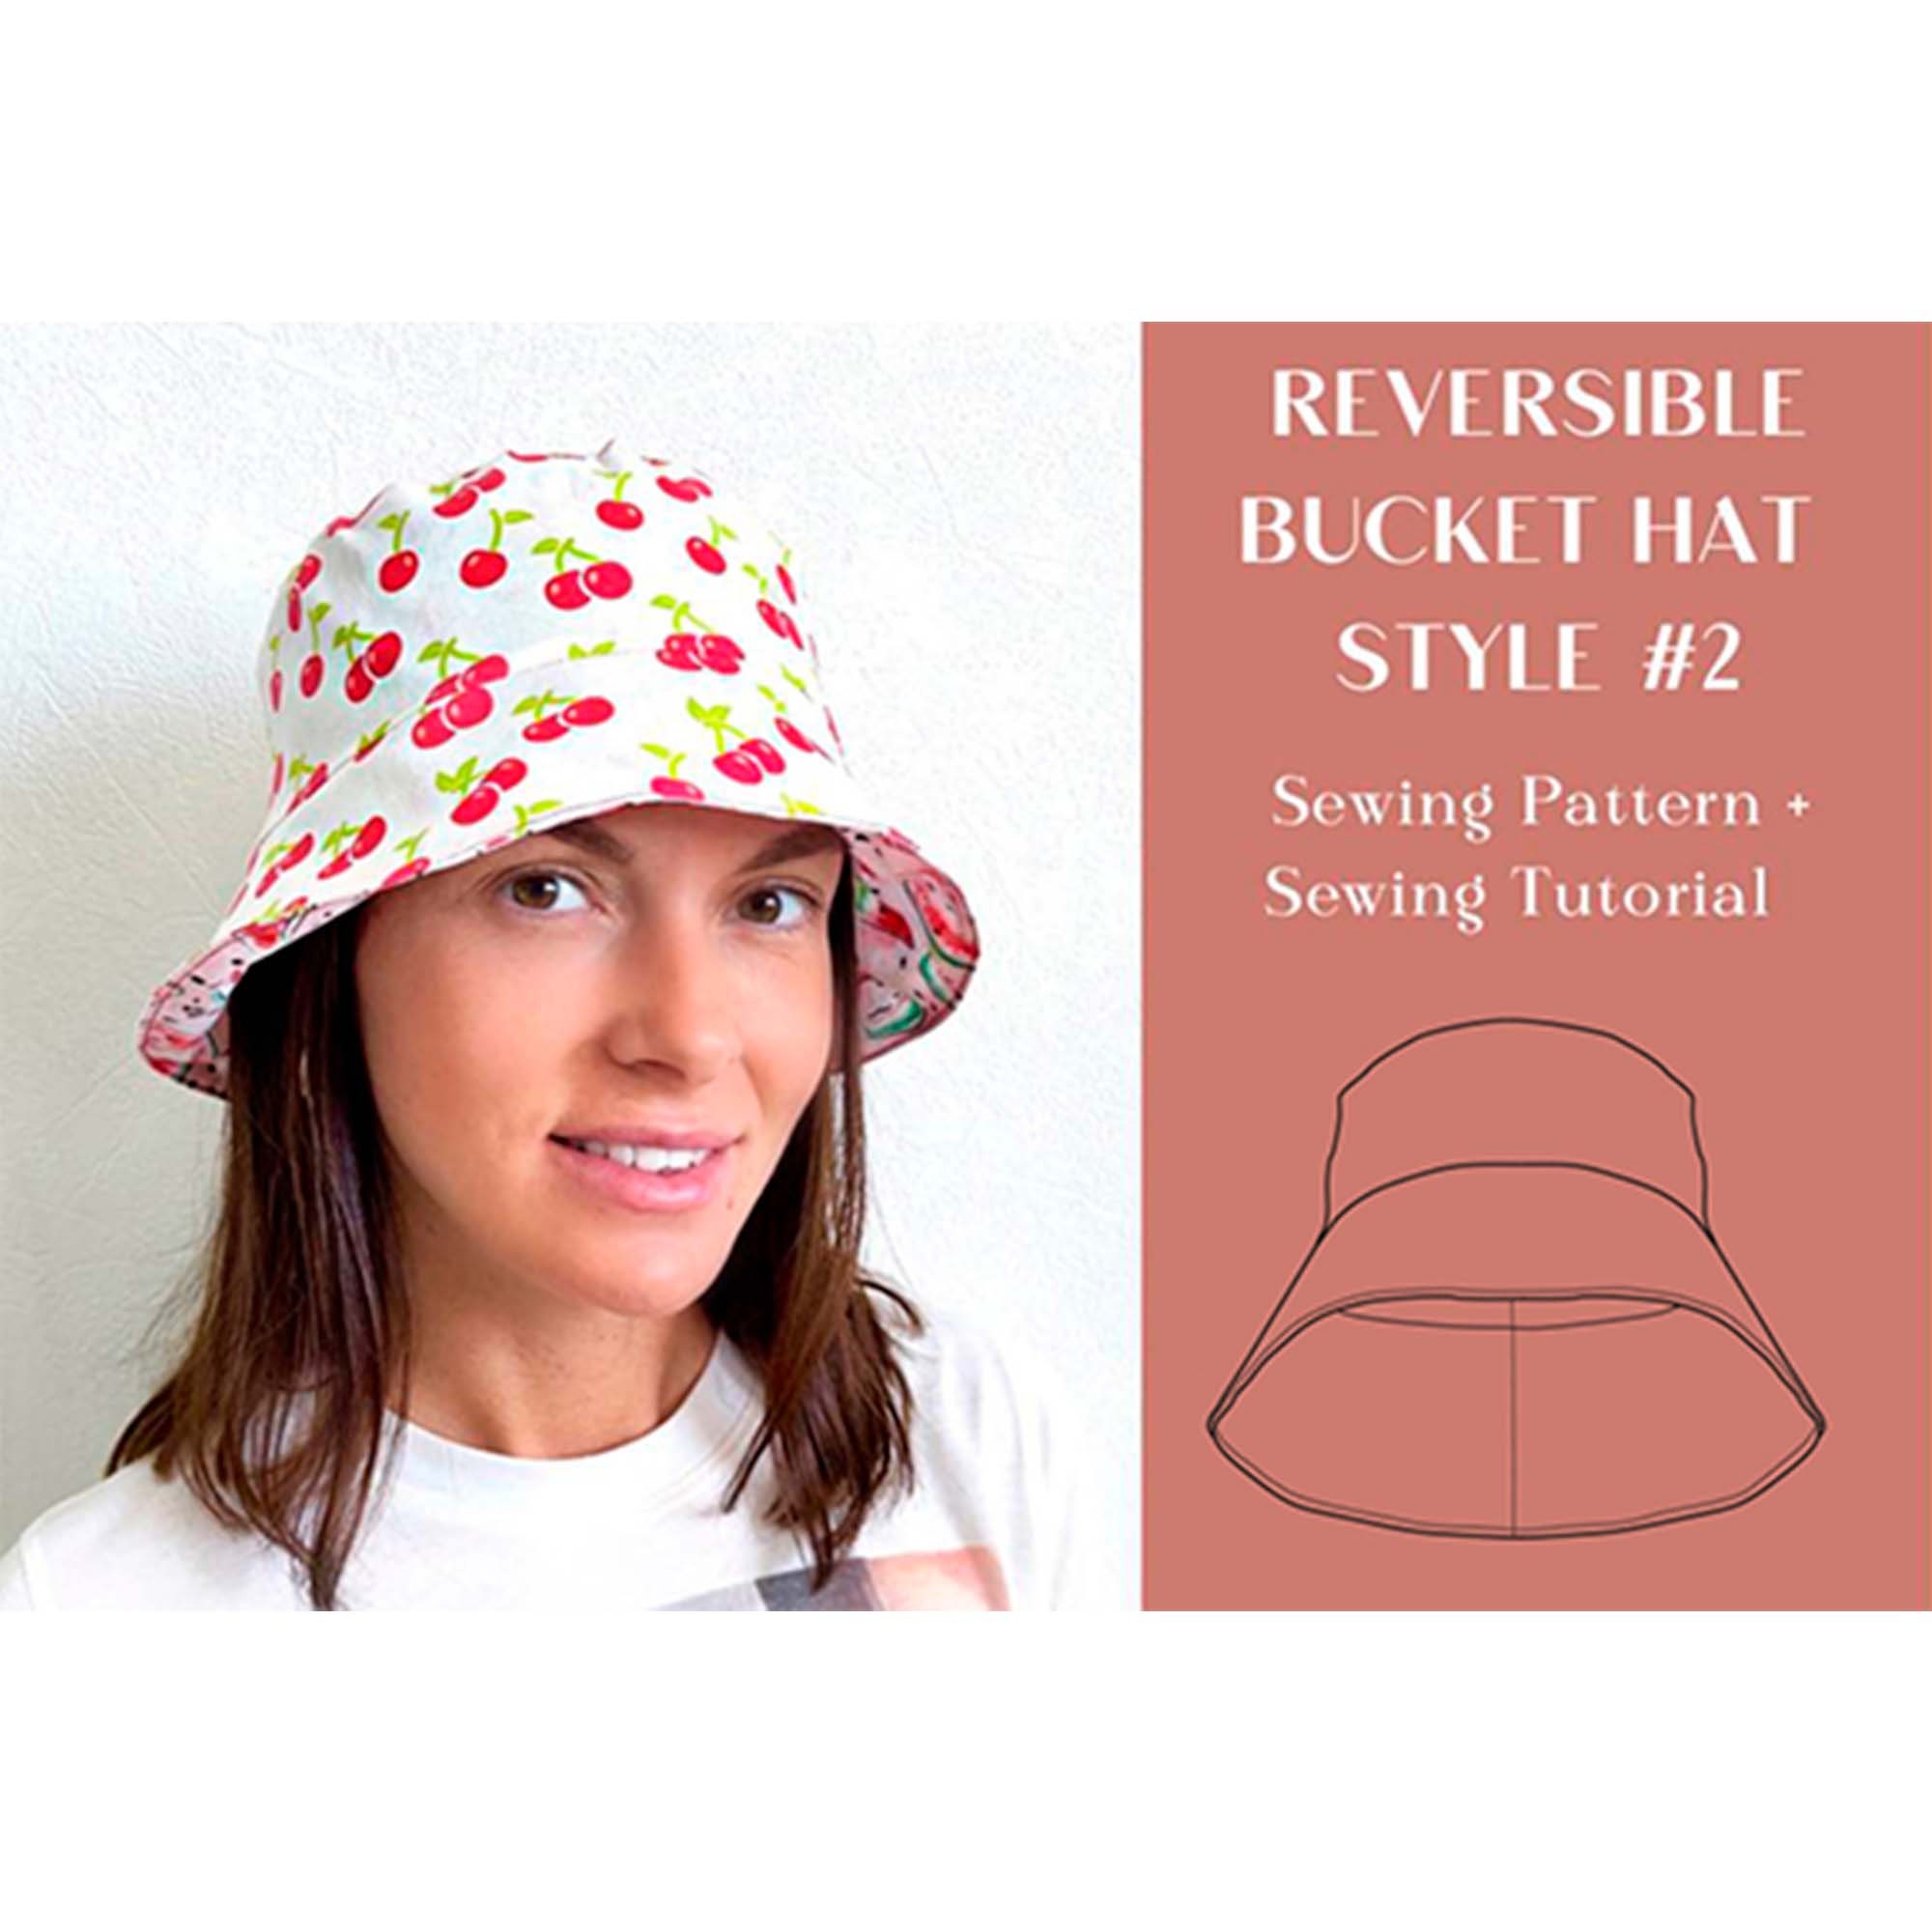 Women Soft Warm Winter Quilted Bucket Hat Foldable Cap New